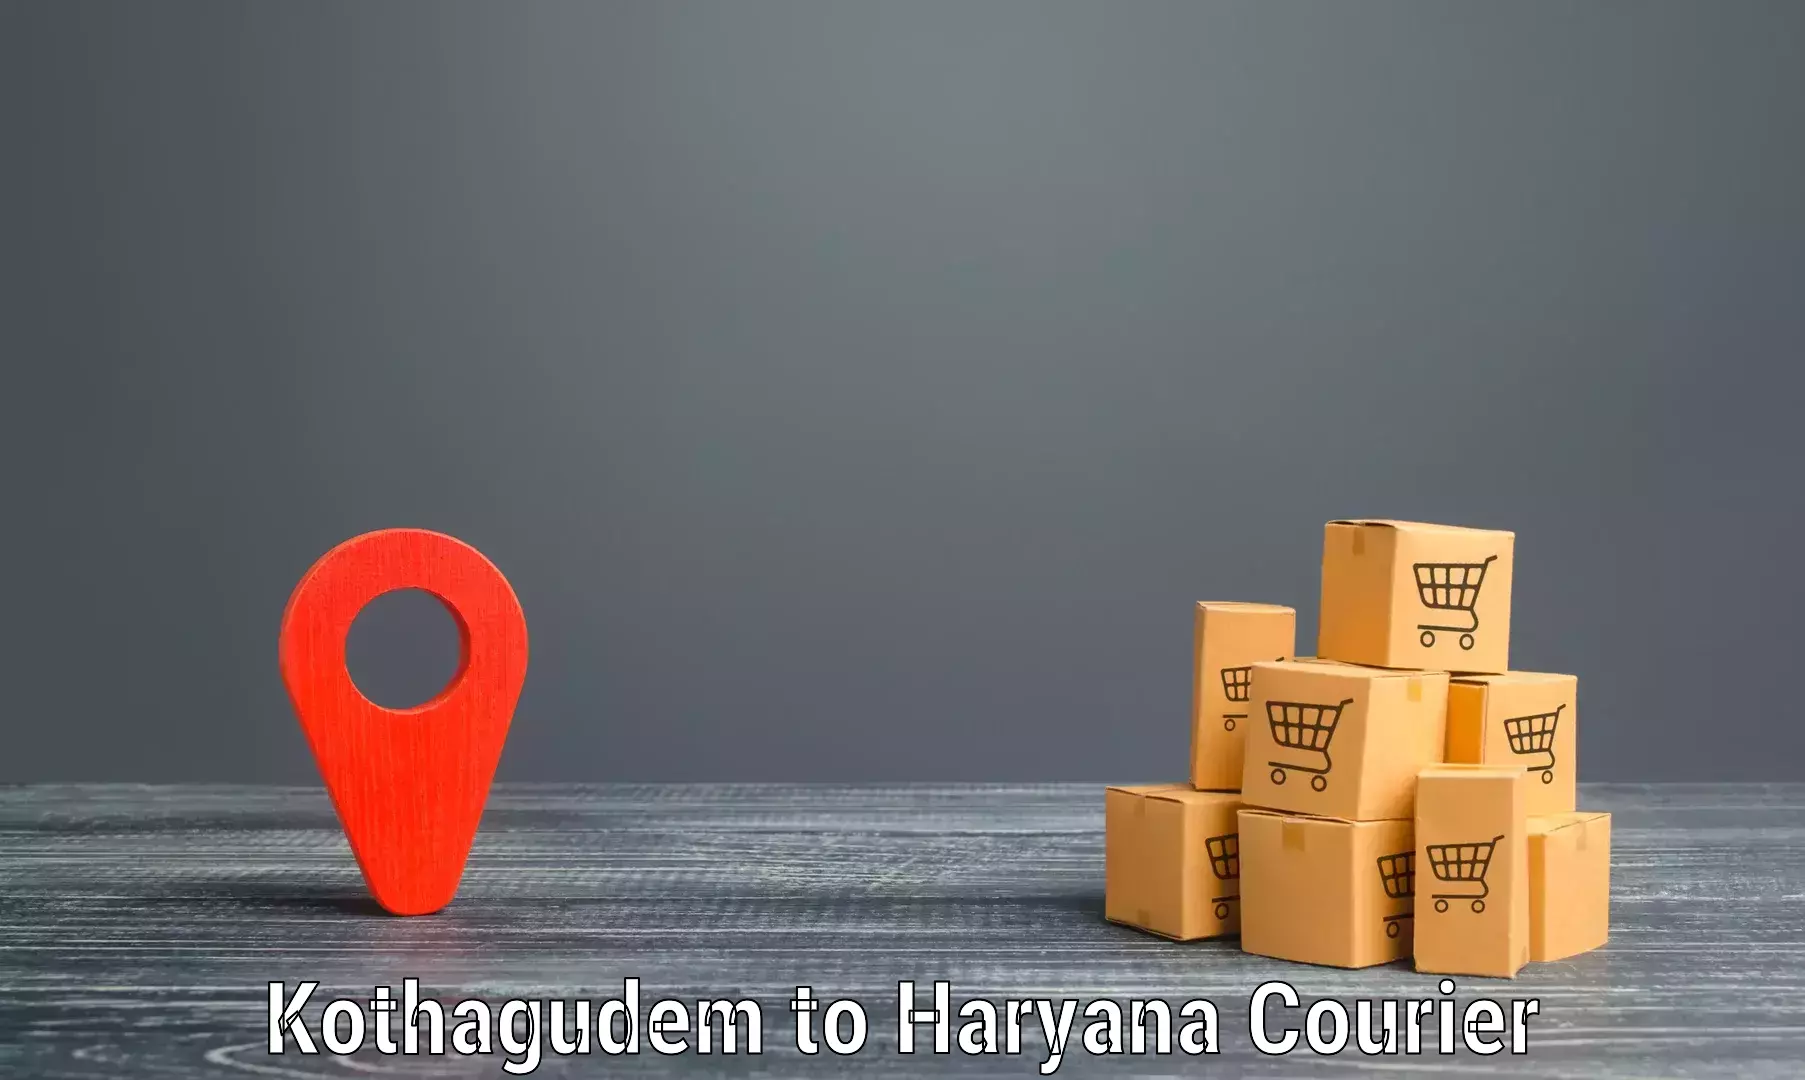 Local delivery service Kothagudem to Chirya